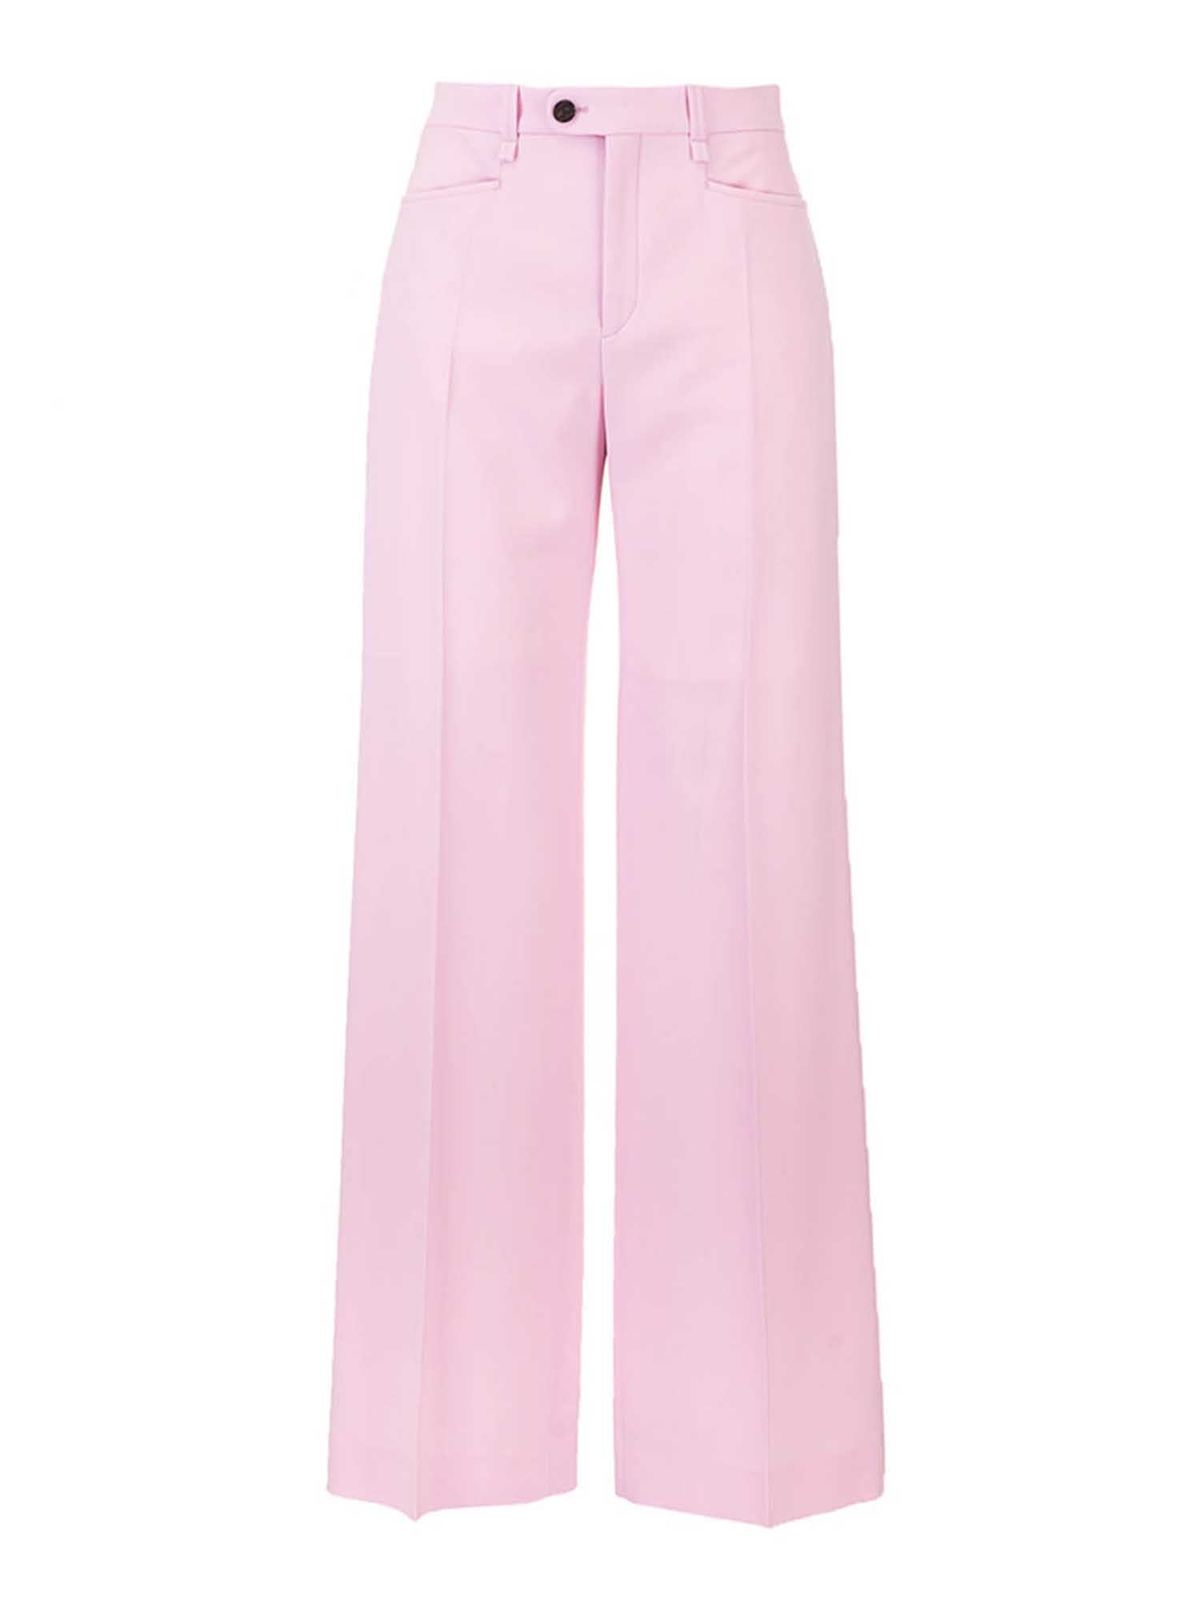 CHLOÉ PALAZZO PANTS IN SWEET LILAC COLOR